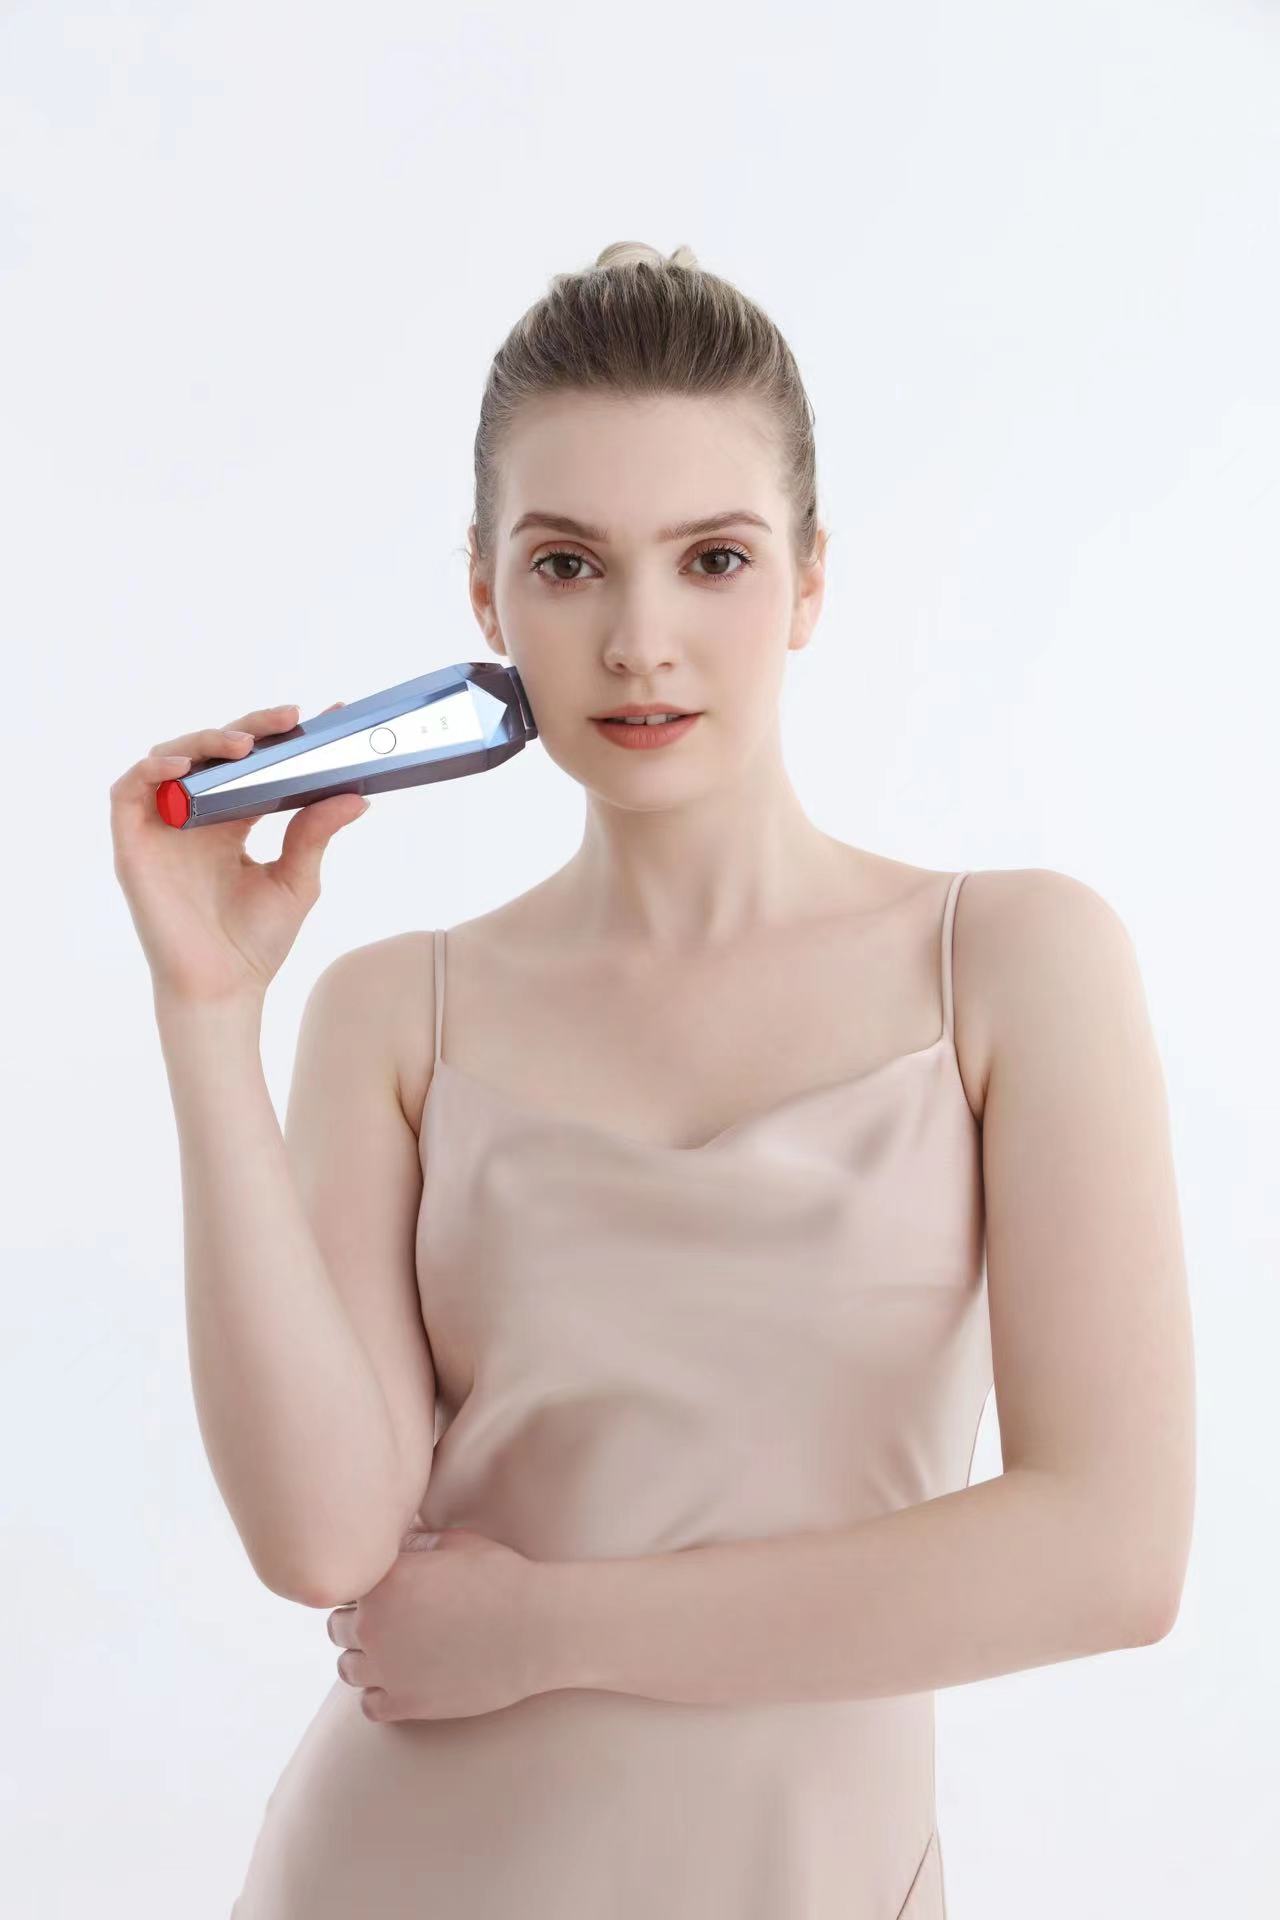 Radio Frequency Skin Tightening Home Device